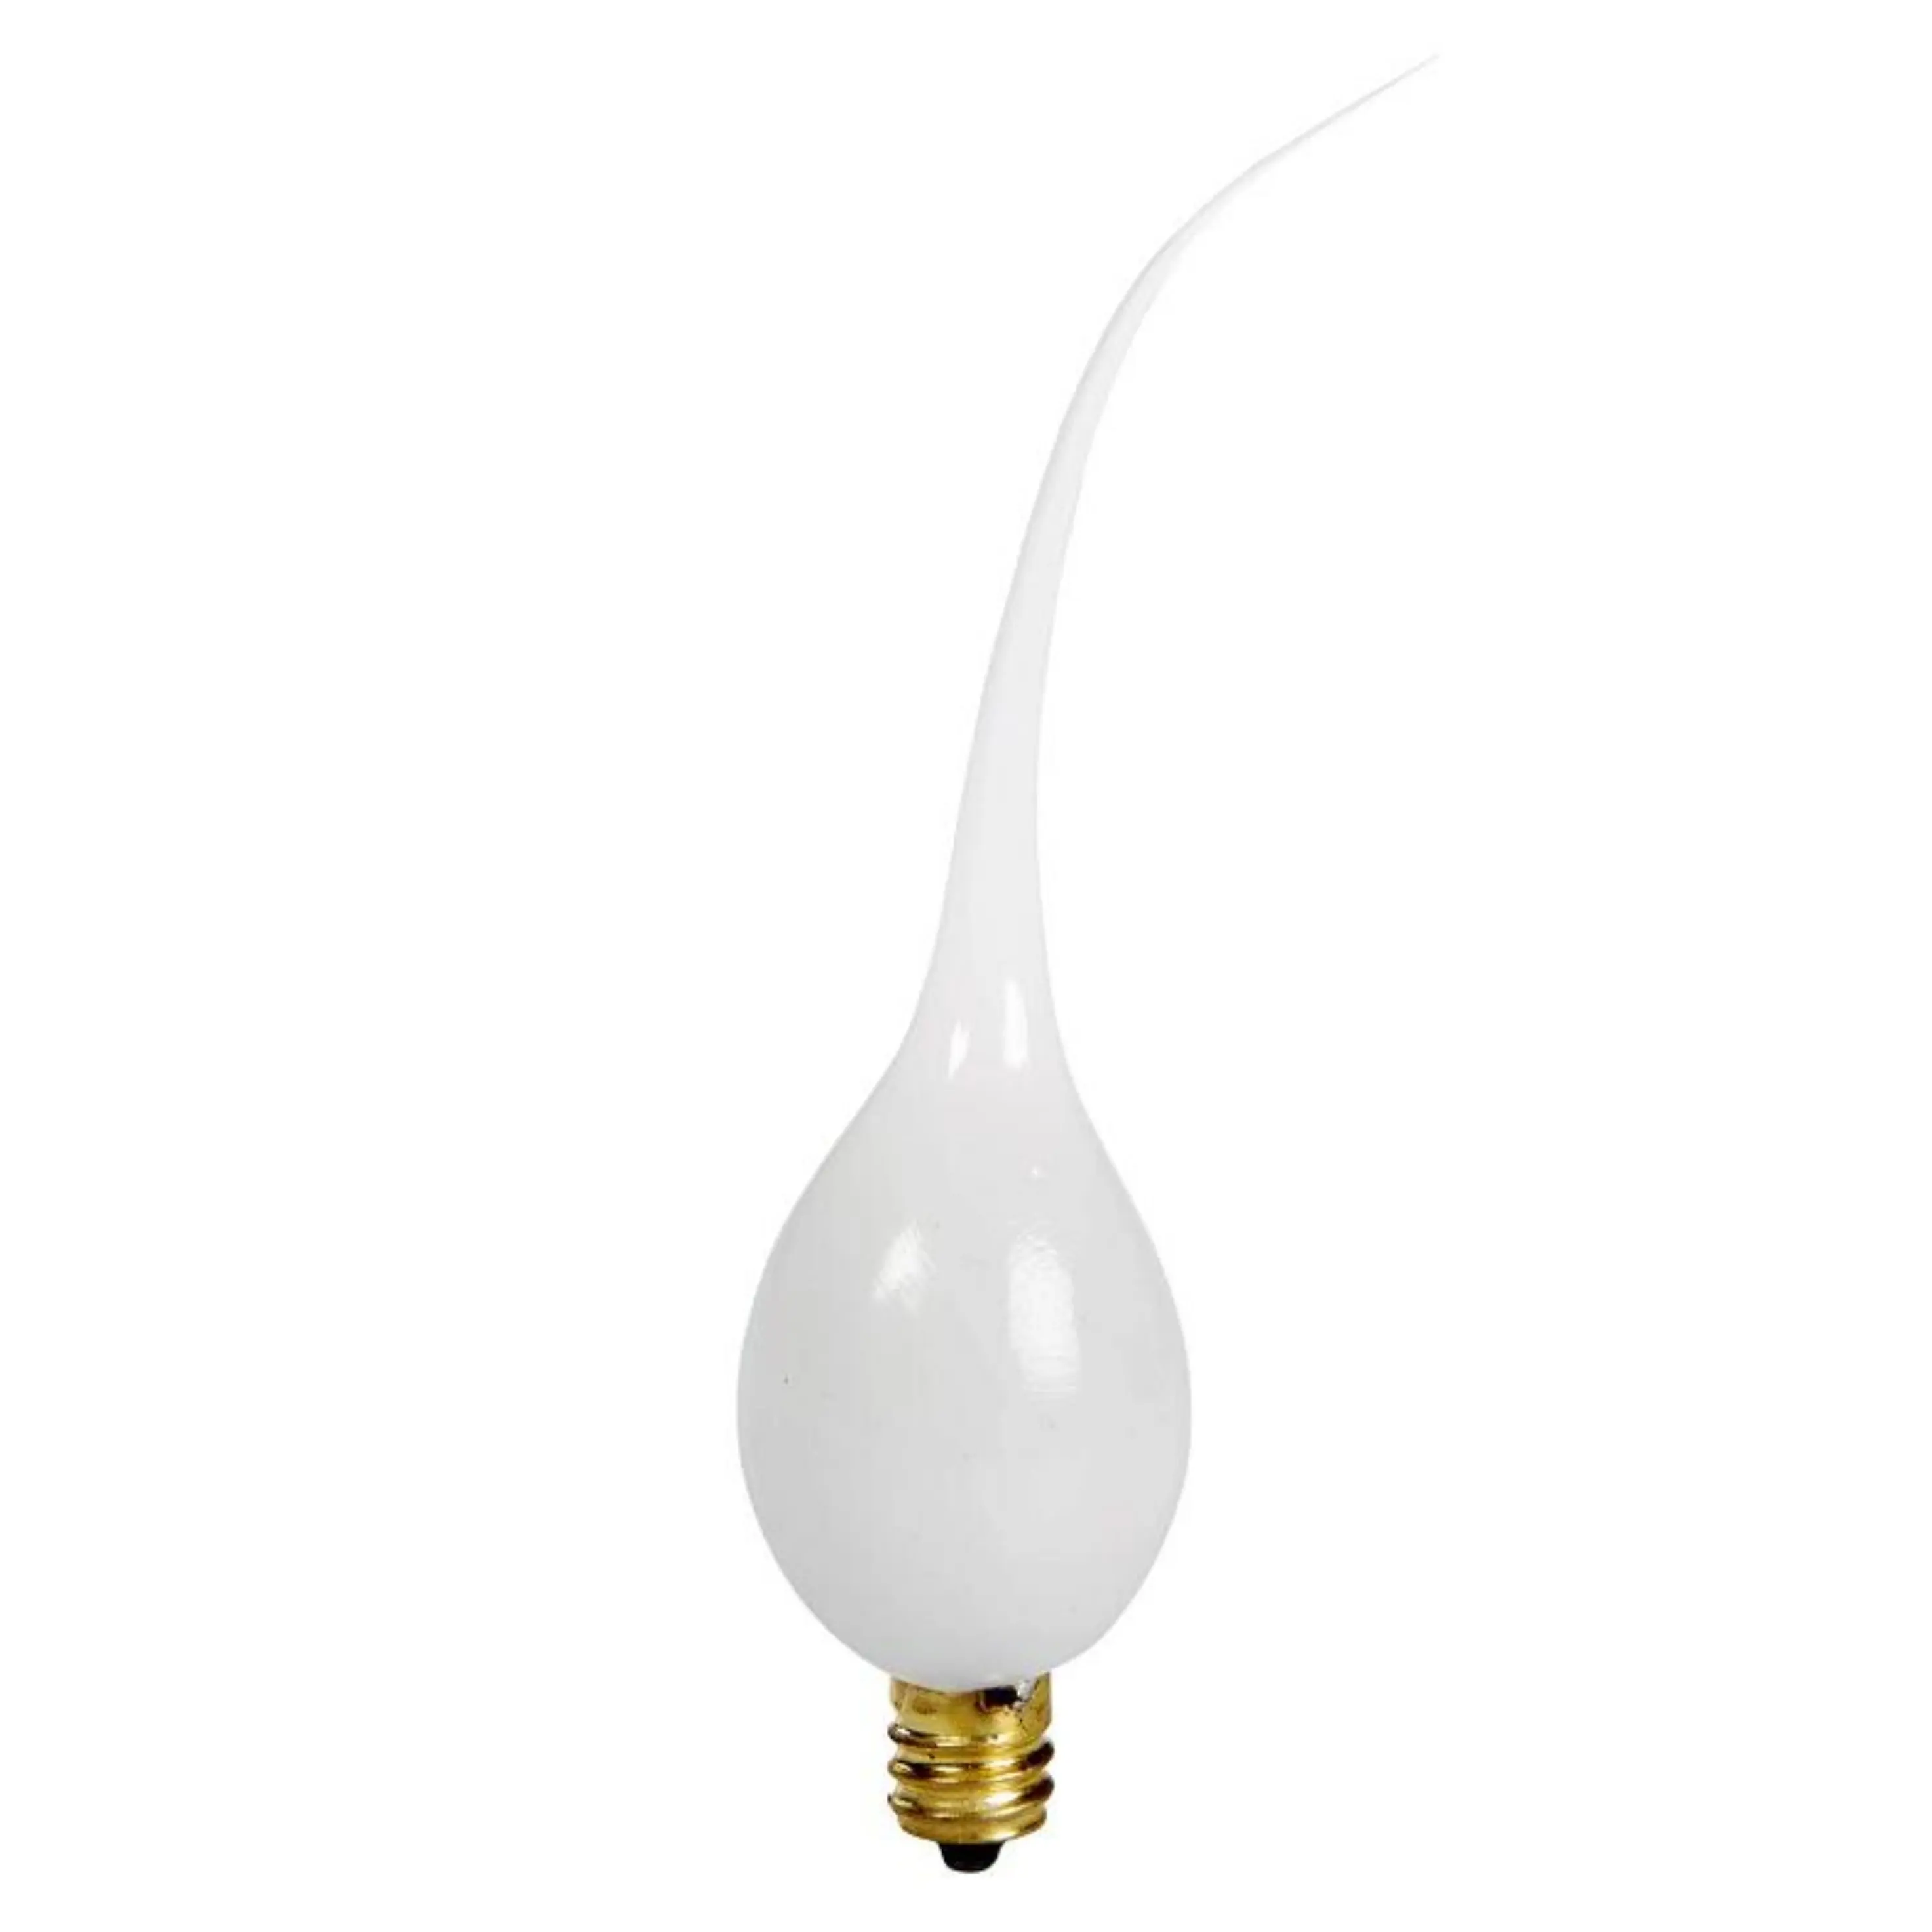 C7 E12 Candle Light Bulbs, 5W Silicone Decorative Light Bulbs for Candelabra, Chandelier, Night Lights and Window Candles